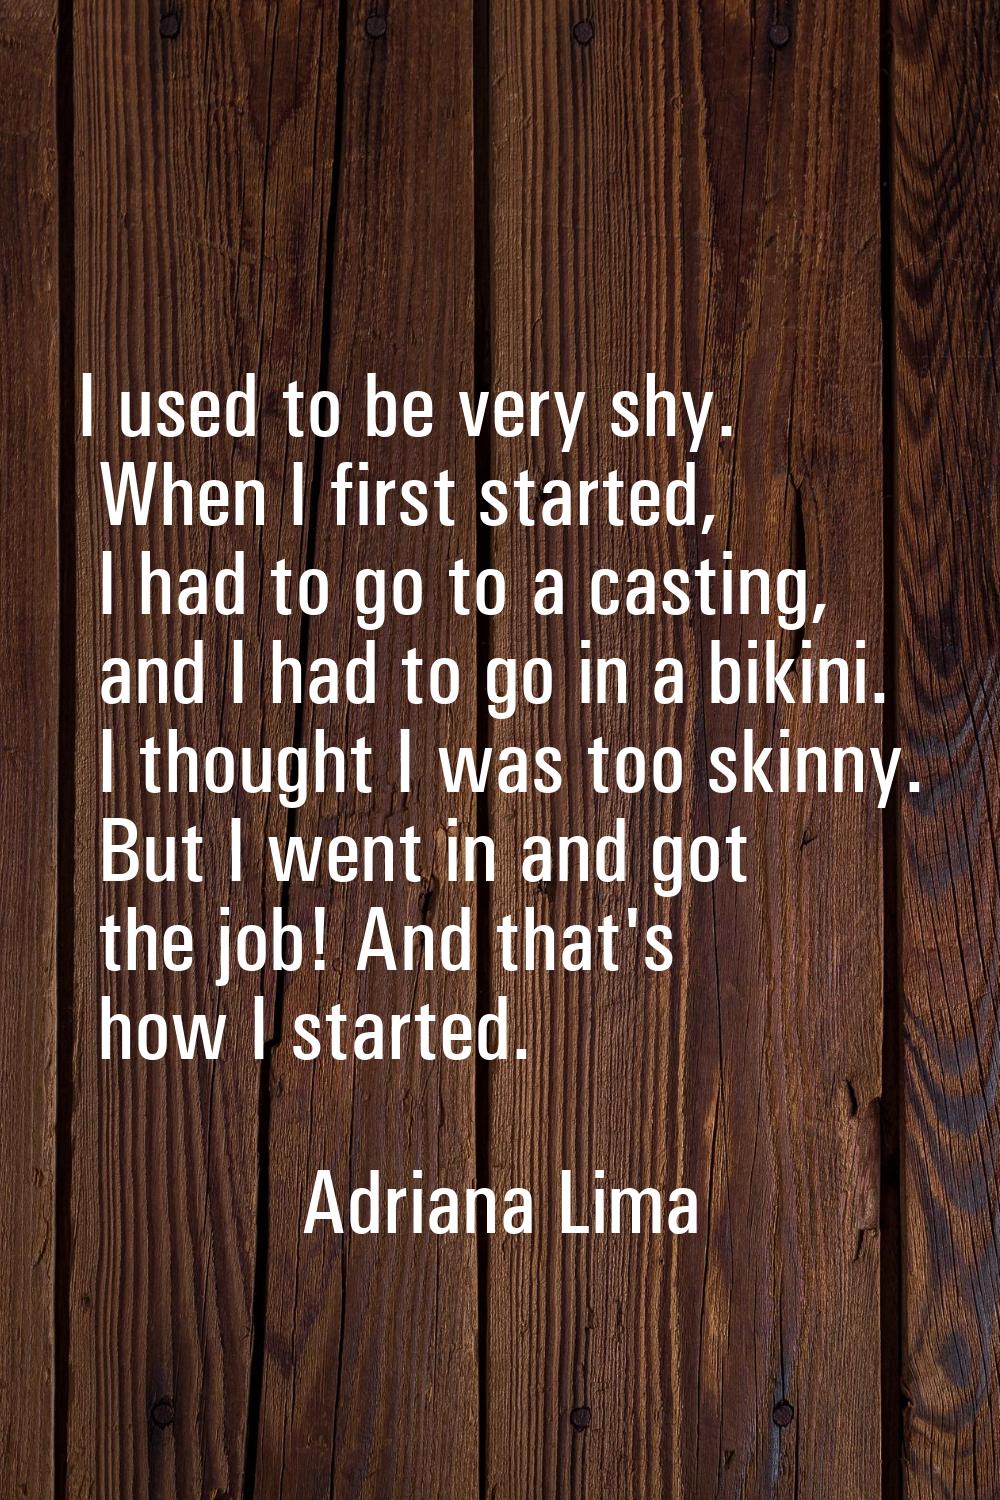 I used to be very shy. When I first started, I had to go to a casting, and I had to go in a bikini.